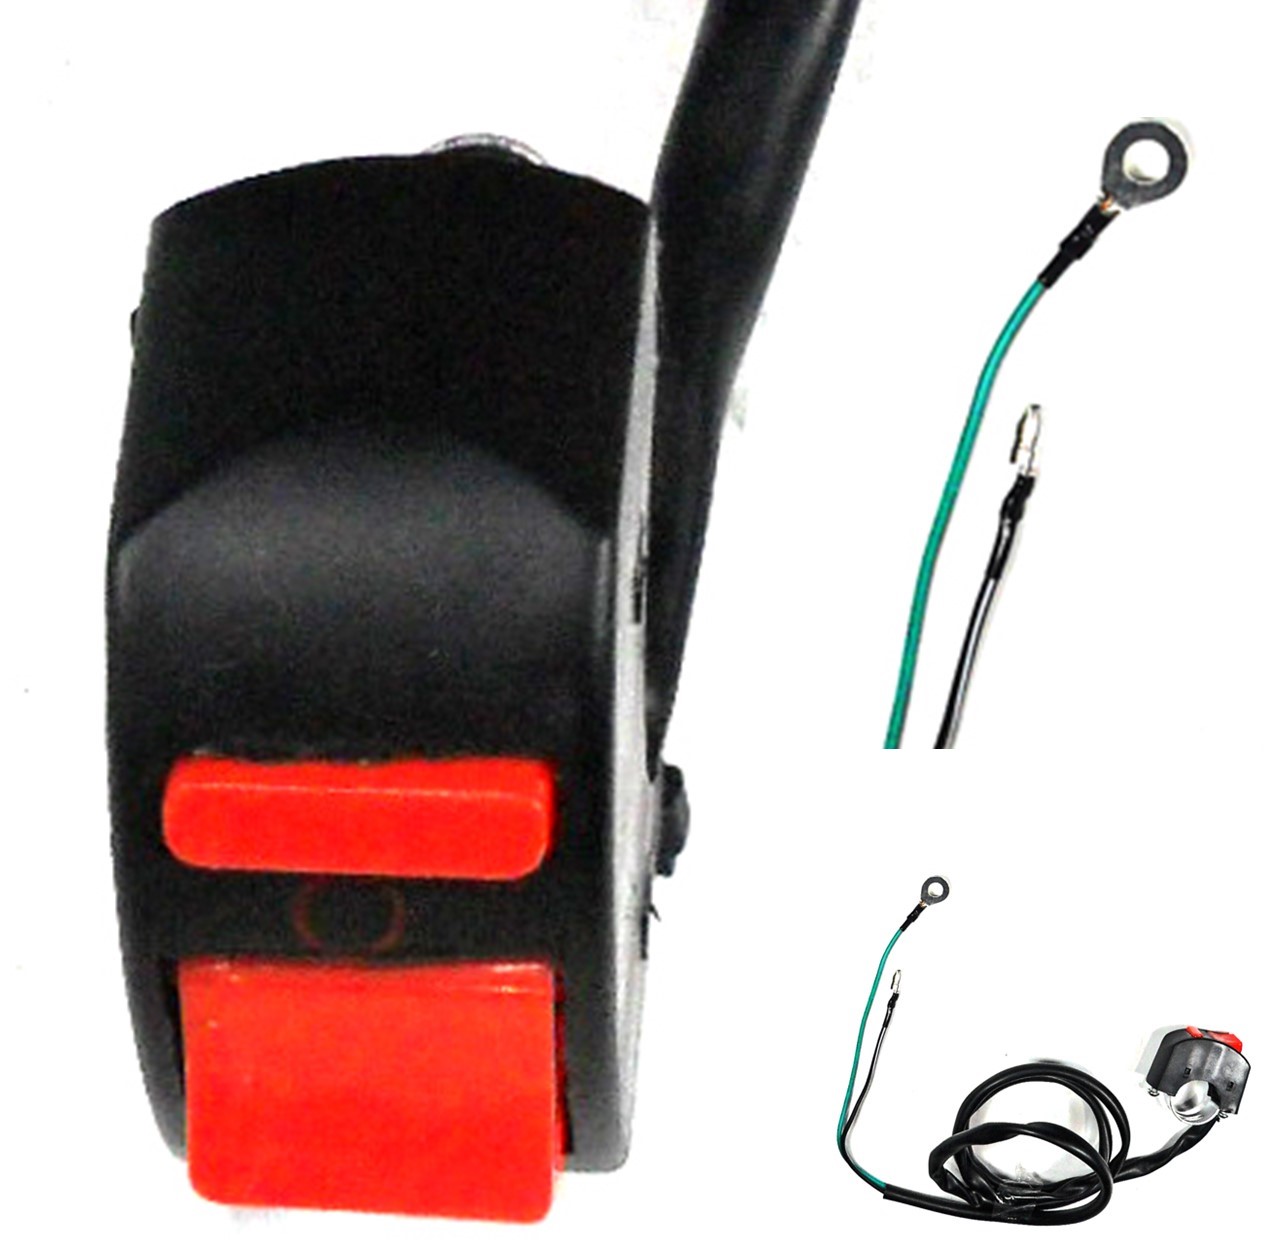 KILL SWITCH 2 Wire Black Wire=38" with Male Bullet Green Wire=40" with Screw Tab